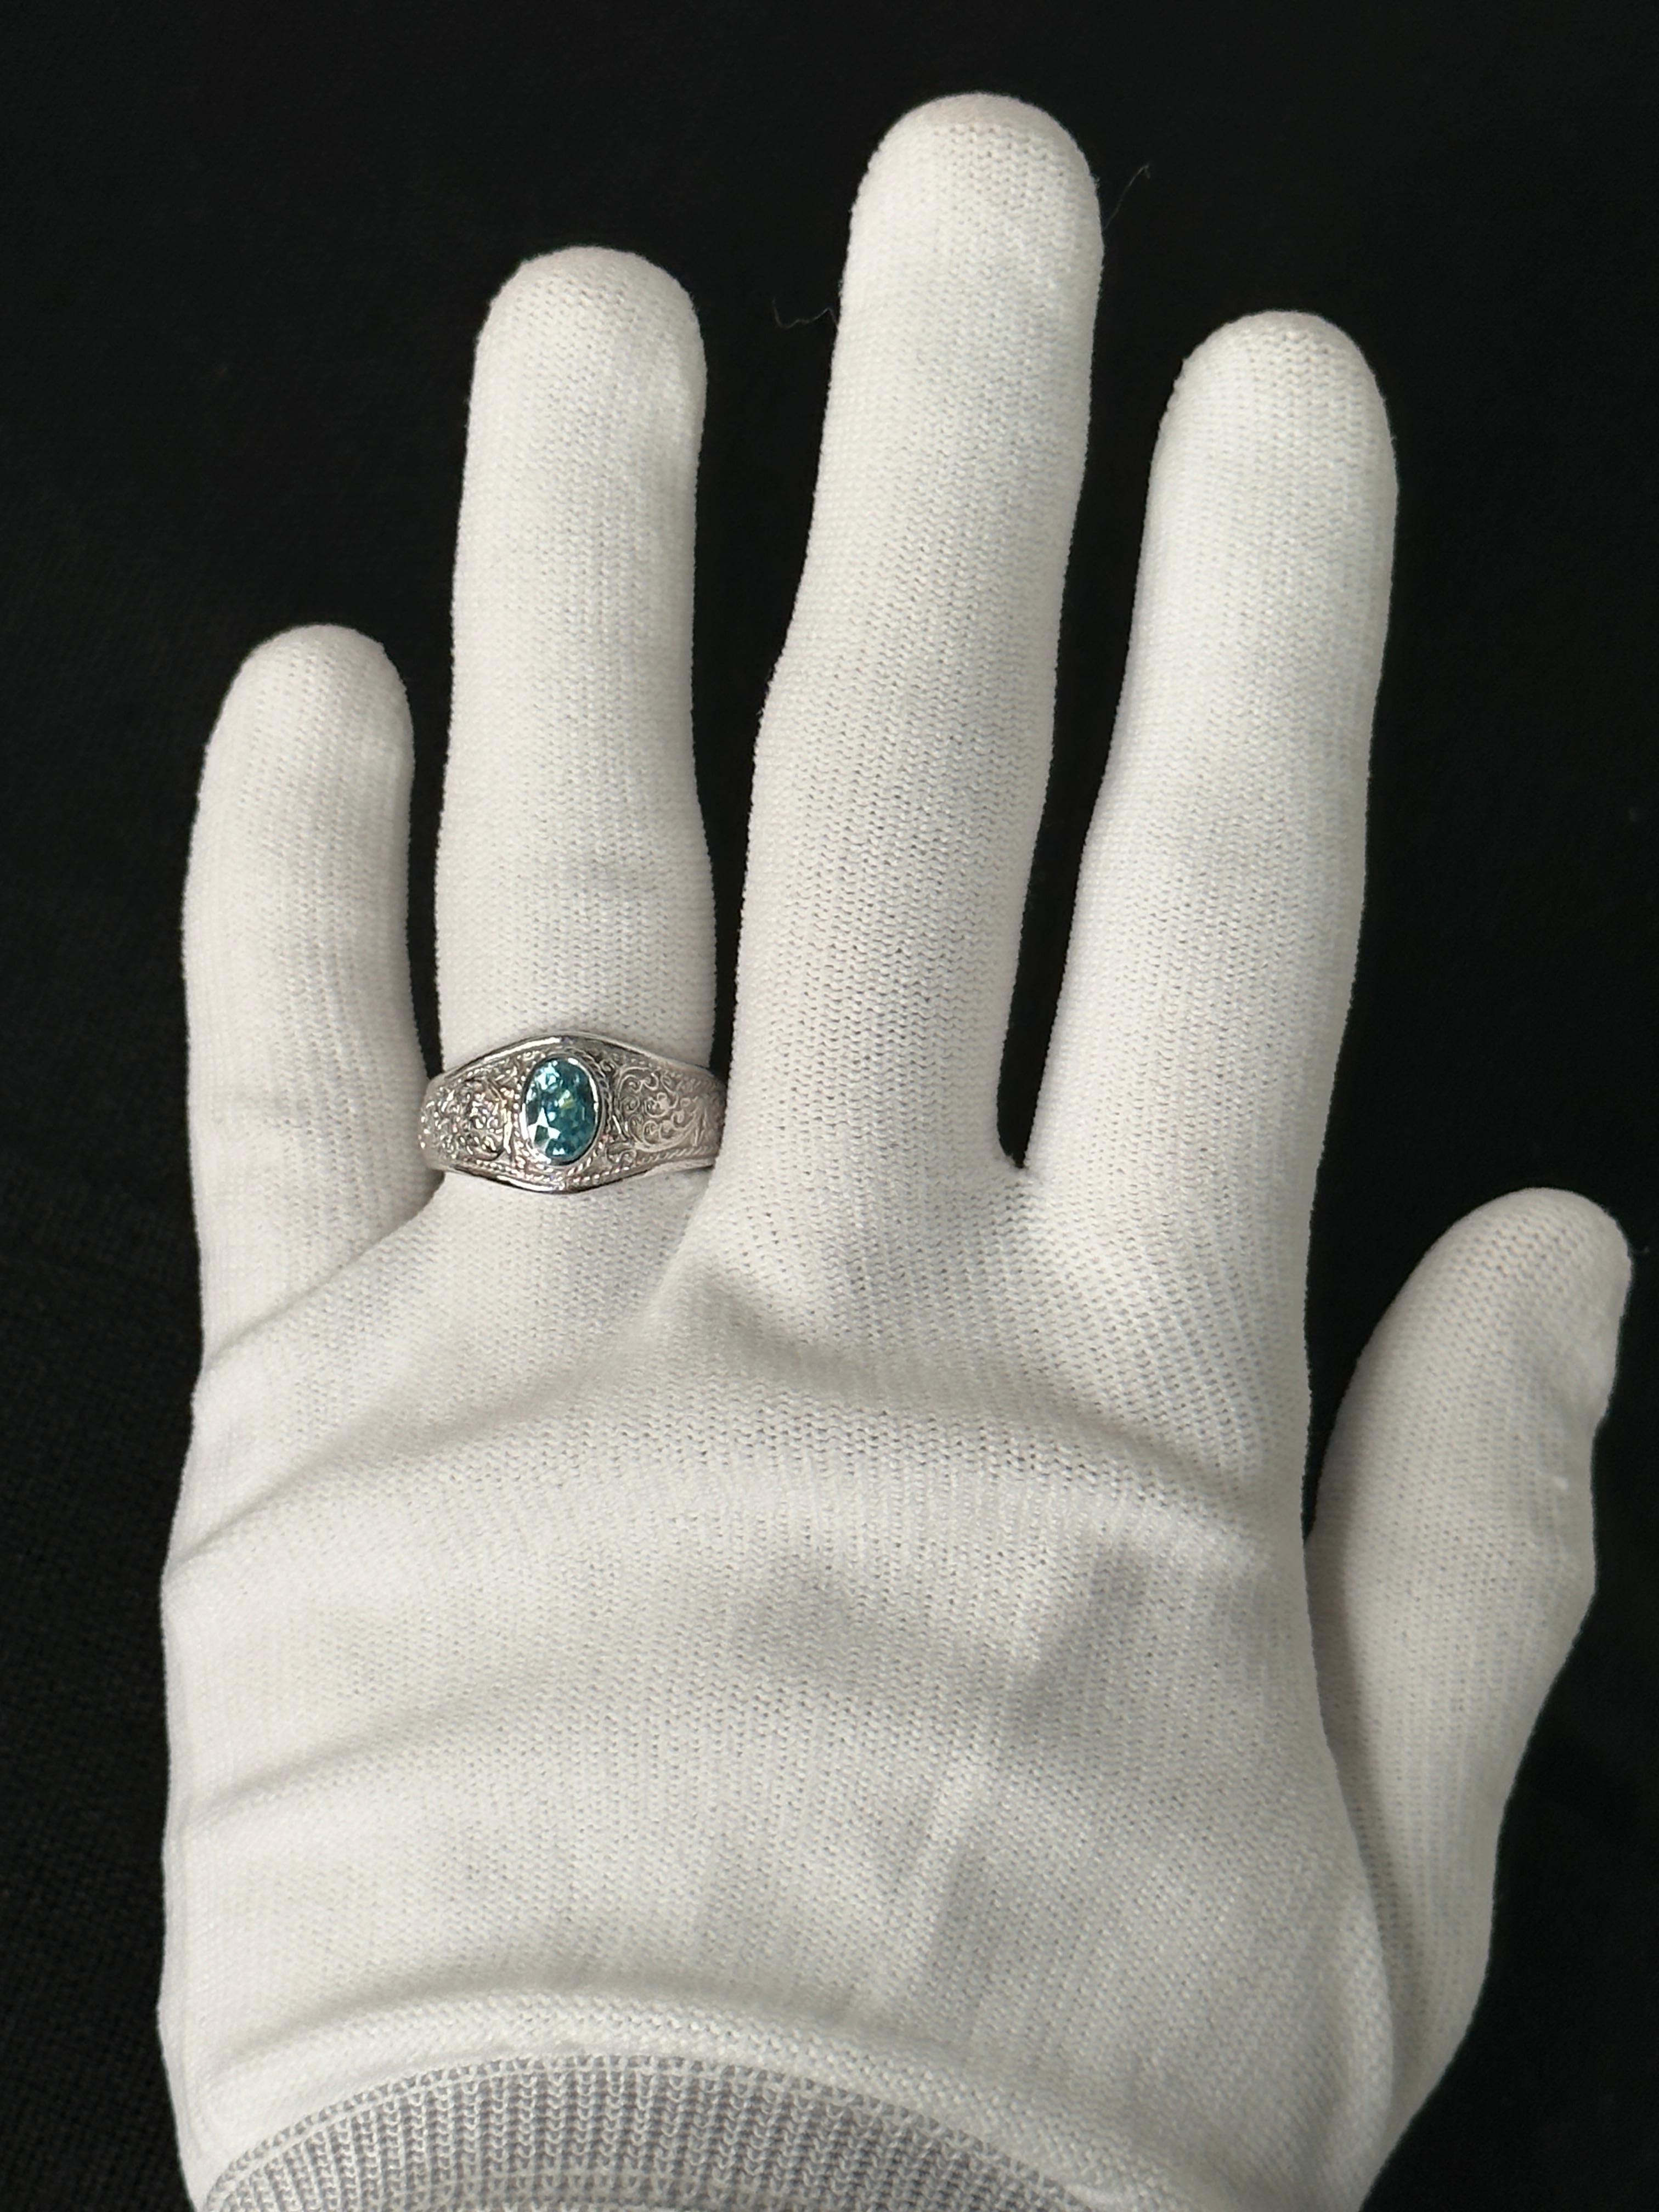 Orloff of Denmark, 1.35 ct Sky Blue Zircon Ring in 925 Sterling Silver In New Condition For Sale In Hua Hin, TH